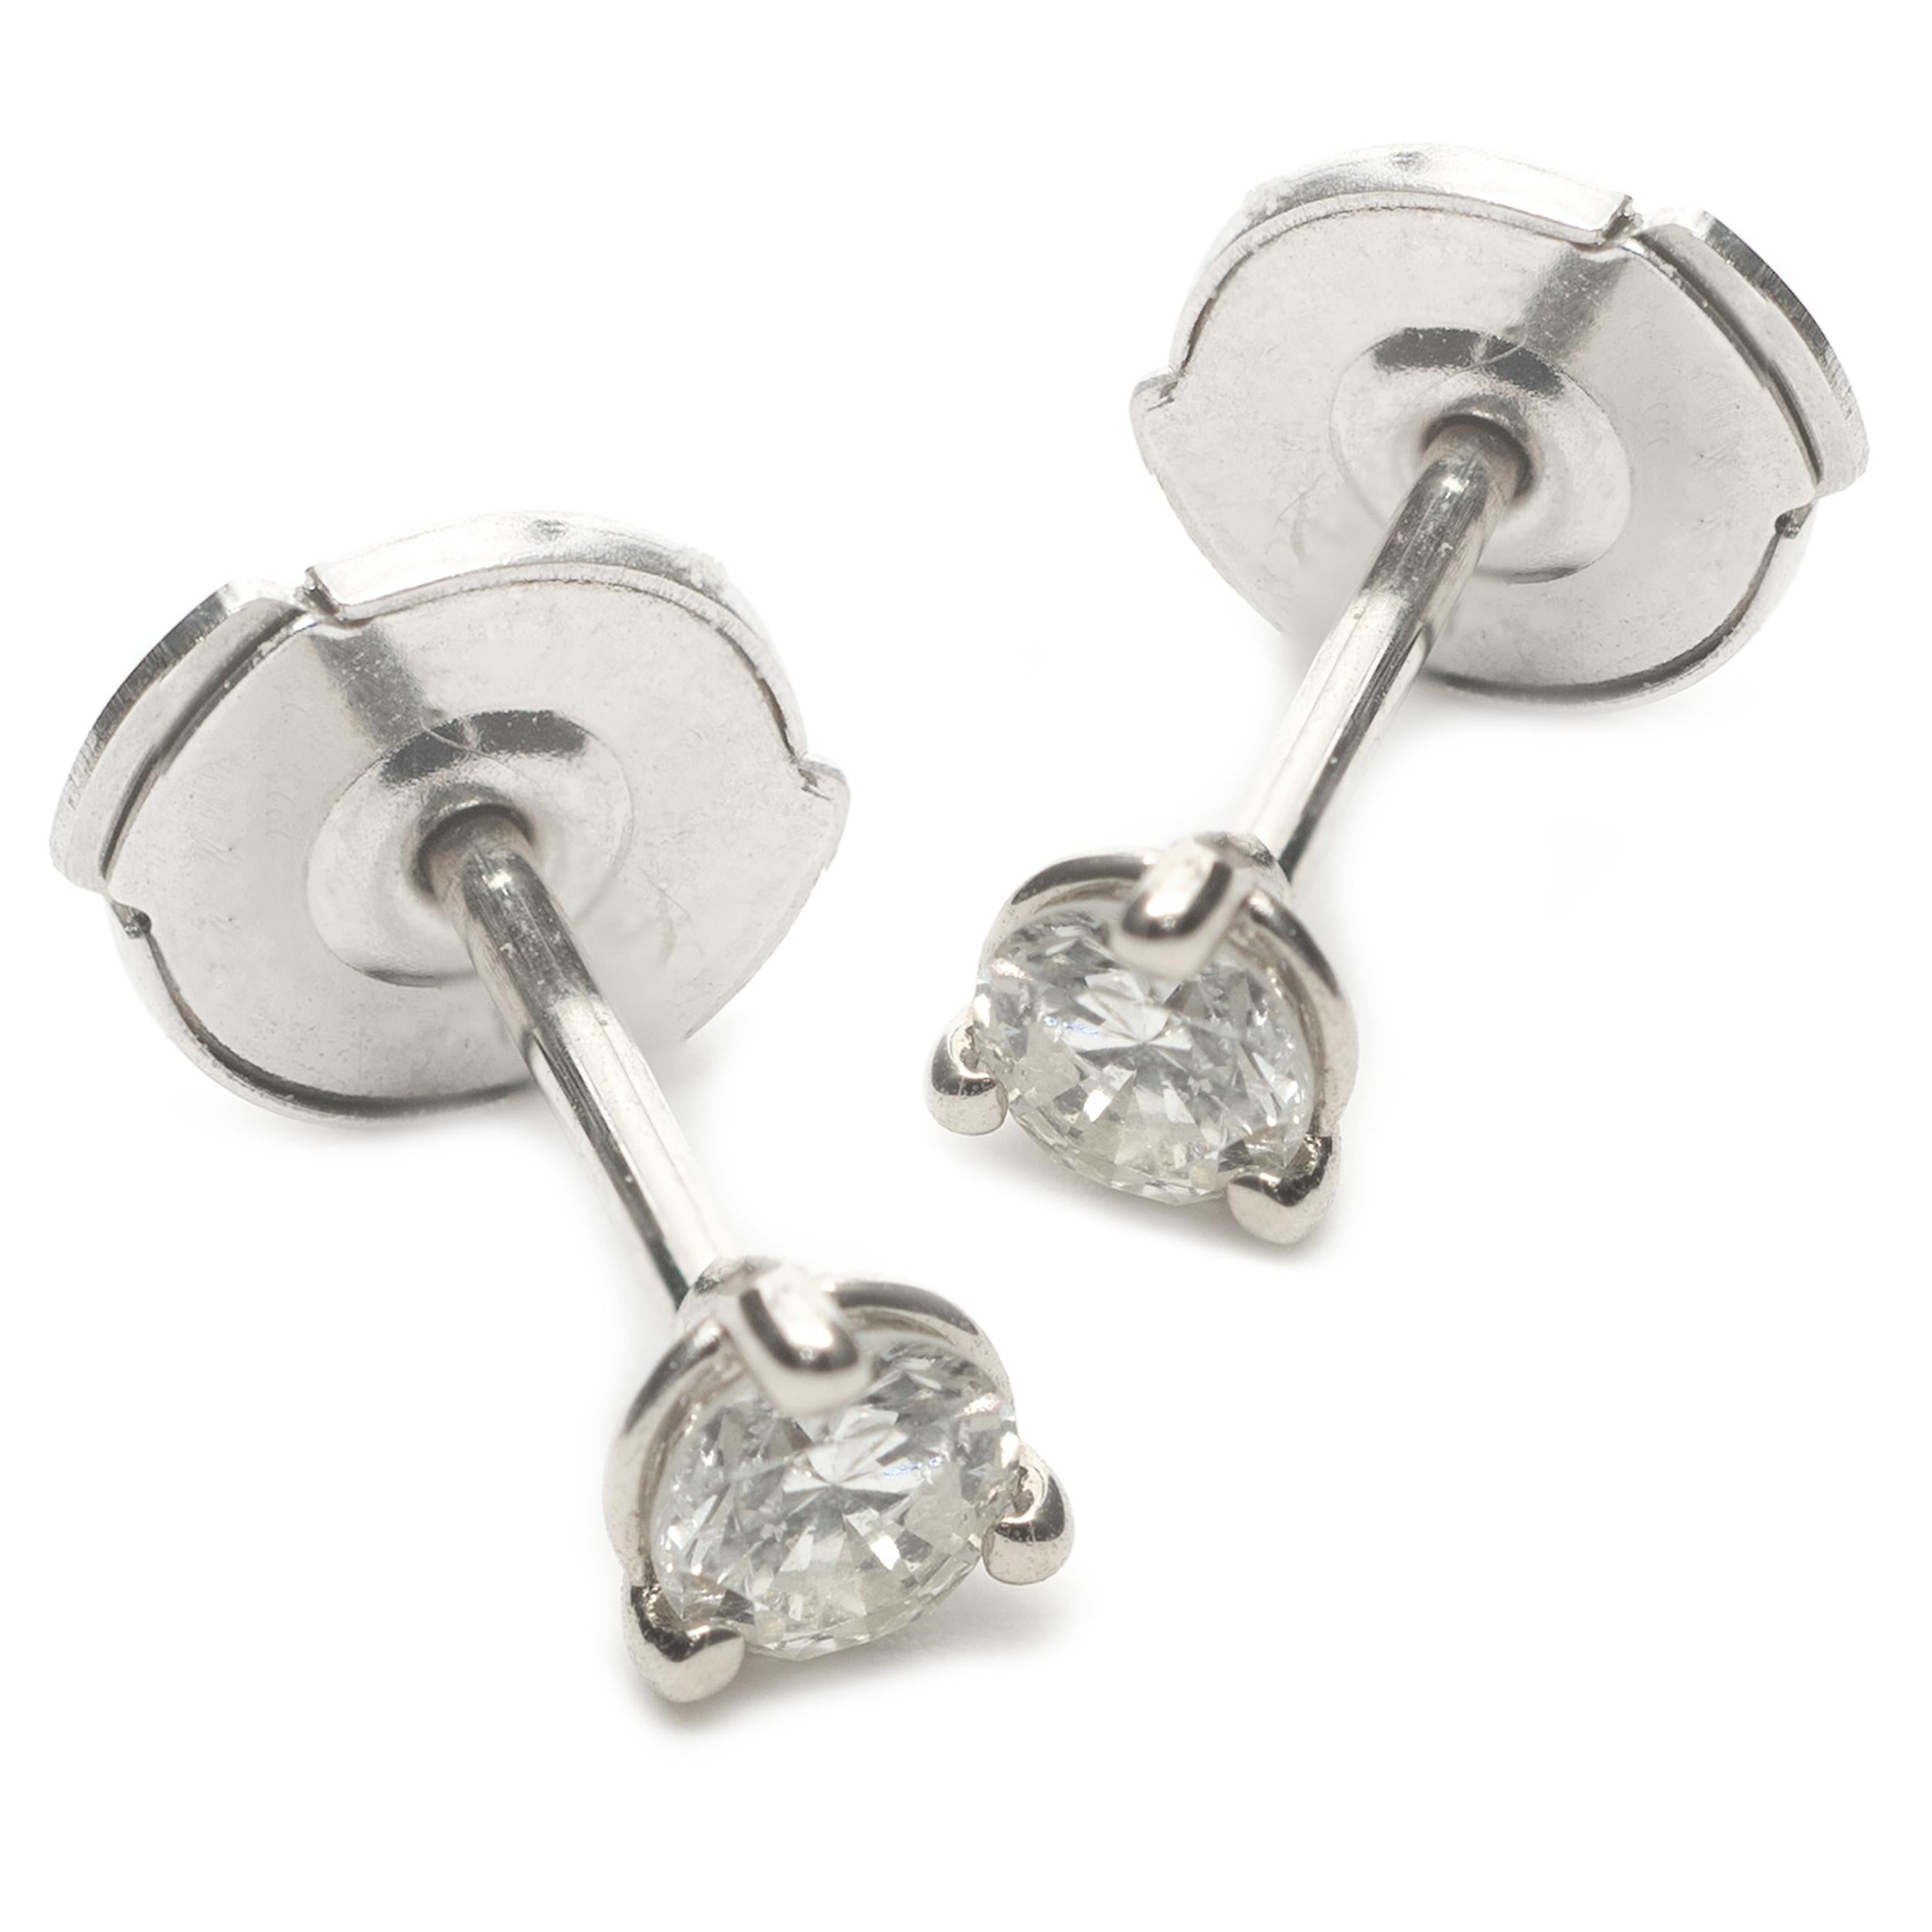 Material: 14k white gold
Diamond: 2 round brilliant cut = 0.24cttw
Color: G
Clarity: SI1
Dimensions: earrings measure approximately 3.5mm in diameter
Fastenings: lapousette backs
Weight: 0.81 grams
